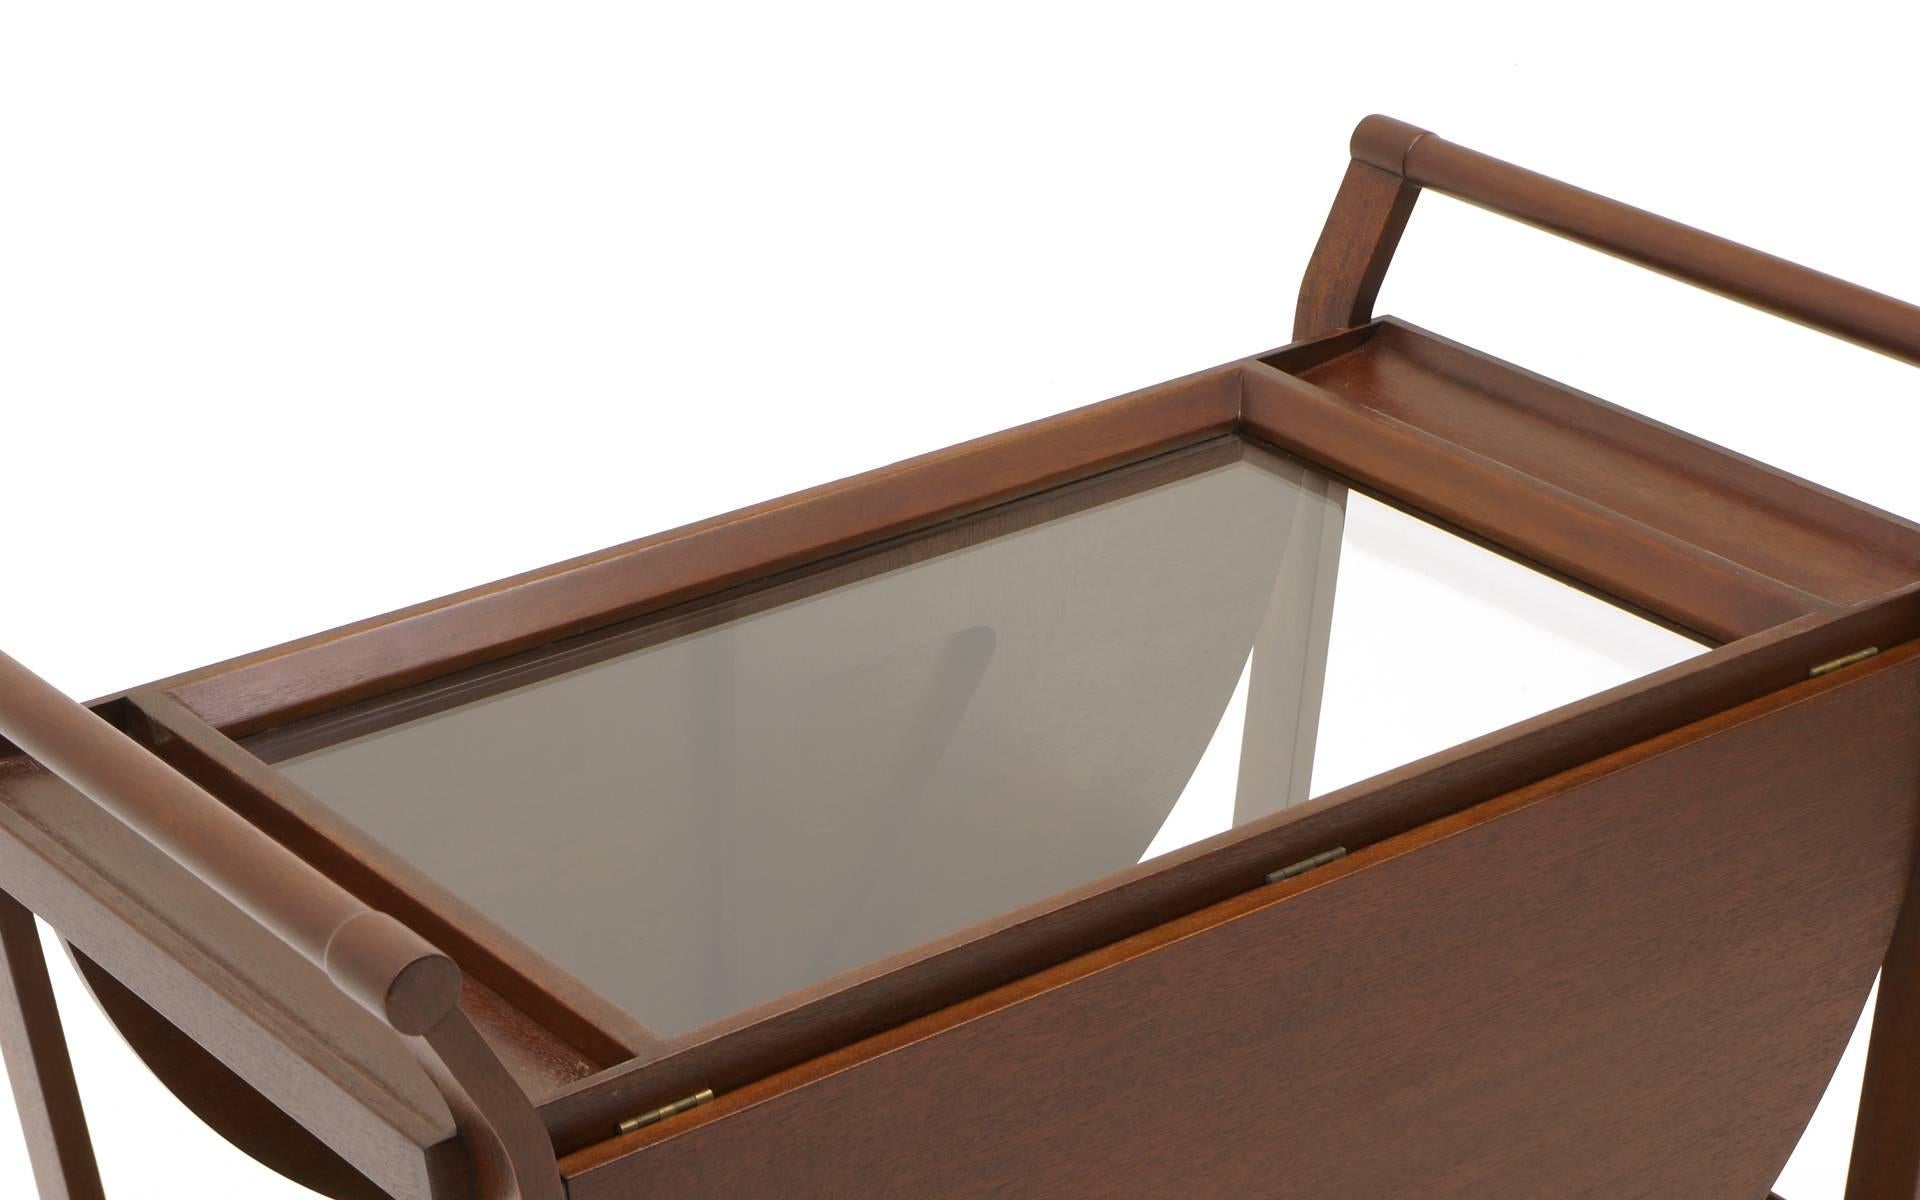 Mid-20th Century Serving or Bar Cart by Edward Wormley for Dunbar, Drop-Leaf with Removable Trays